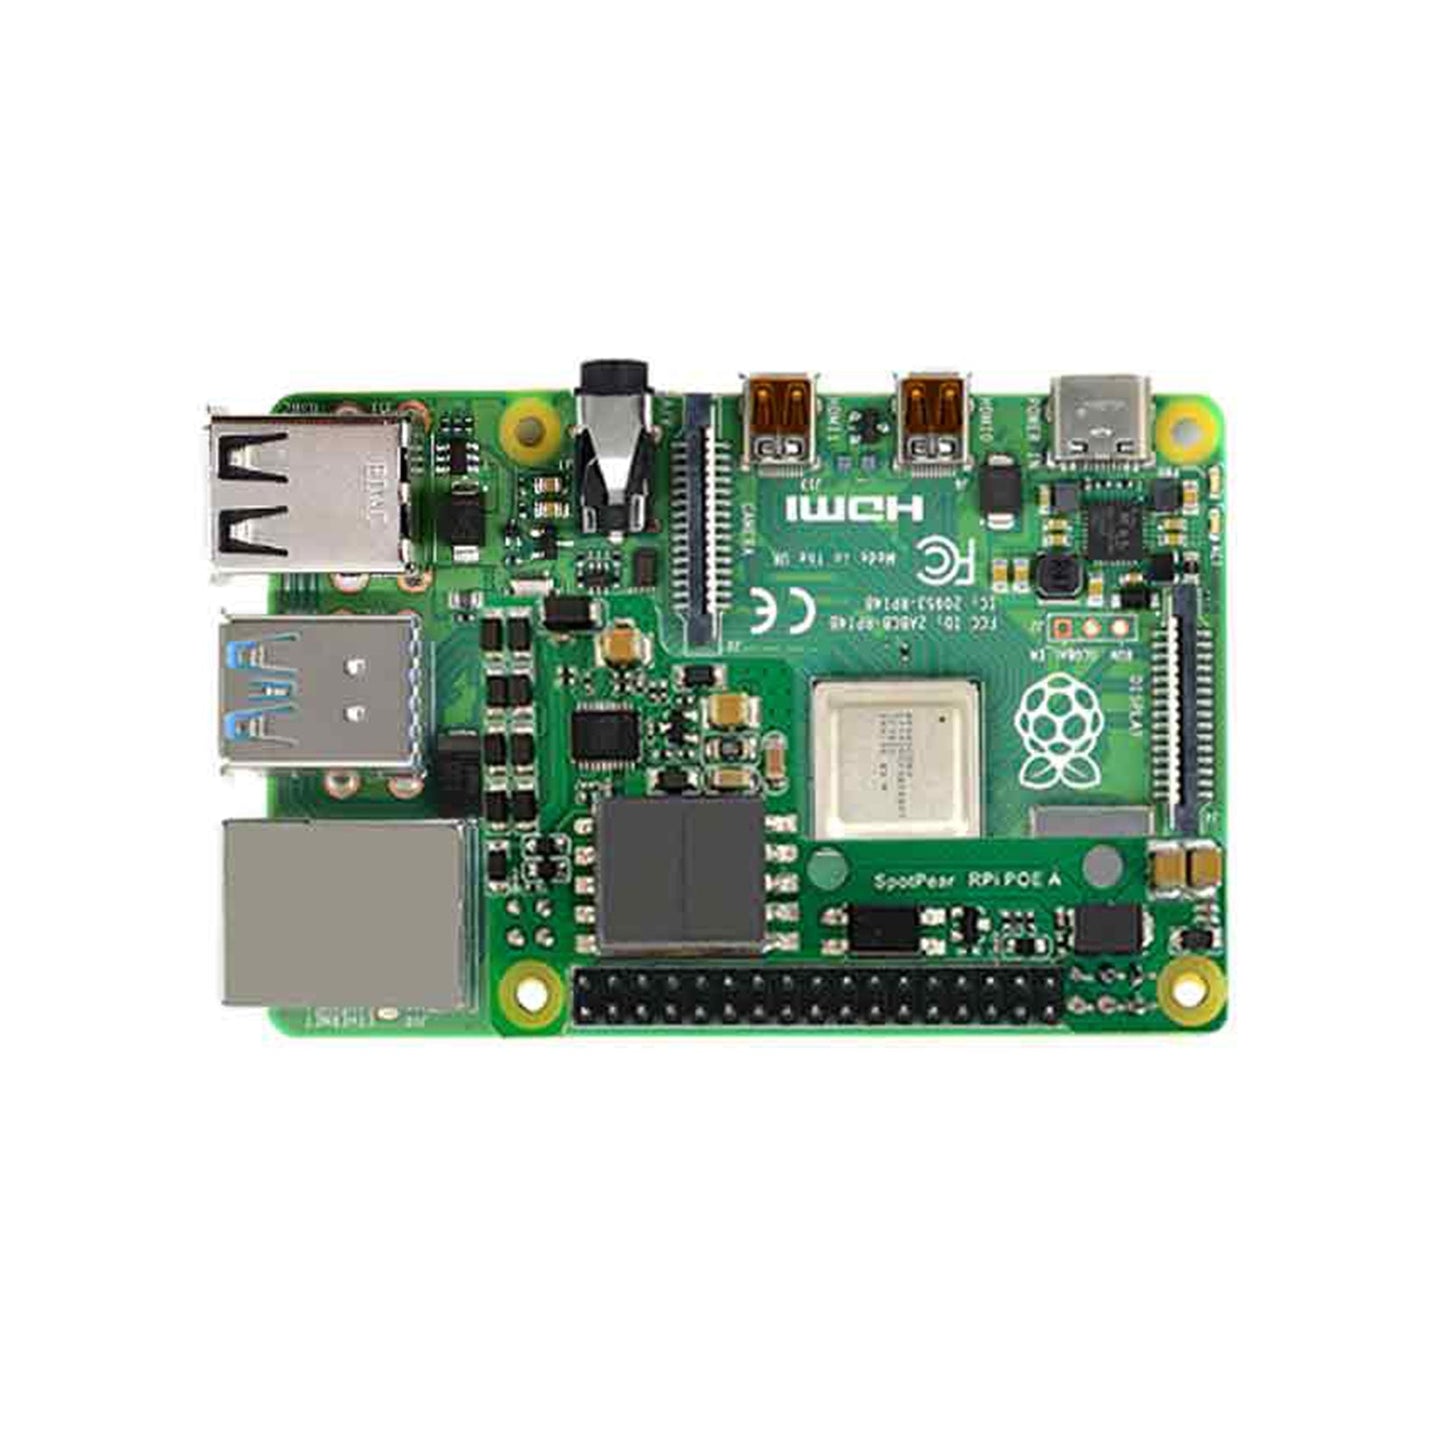 Raspberry Pi Poe Ethernet Power Supply Expansion Module Supports 3B+/4B with Fan